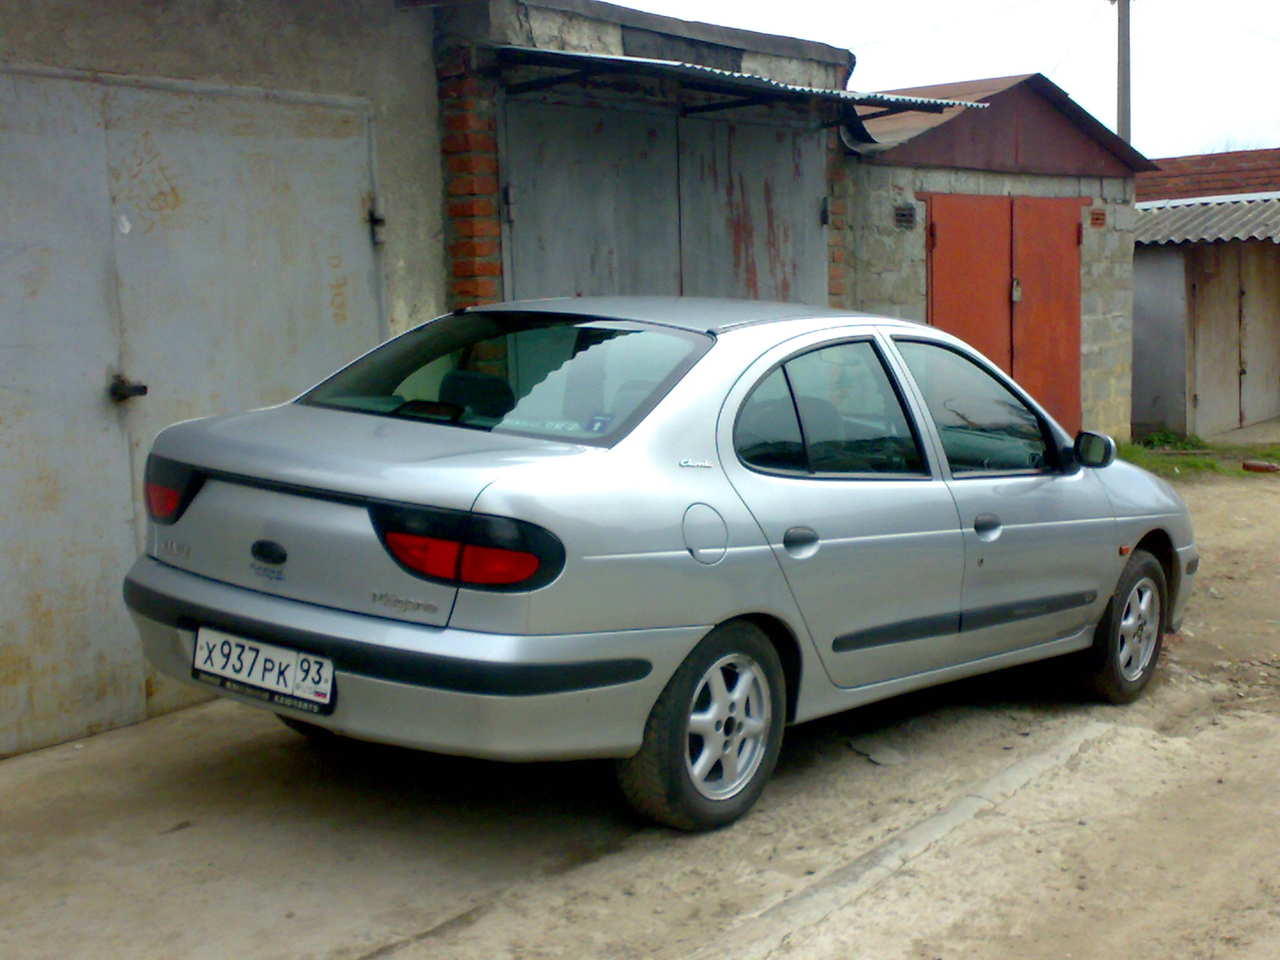 1998 Renault Megane Specs Engine Size 2 0 Fuel Type Gasoline Drive Wheels Ff Transmission Gearbox Automatic